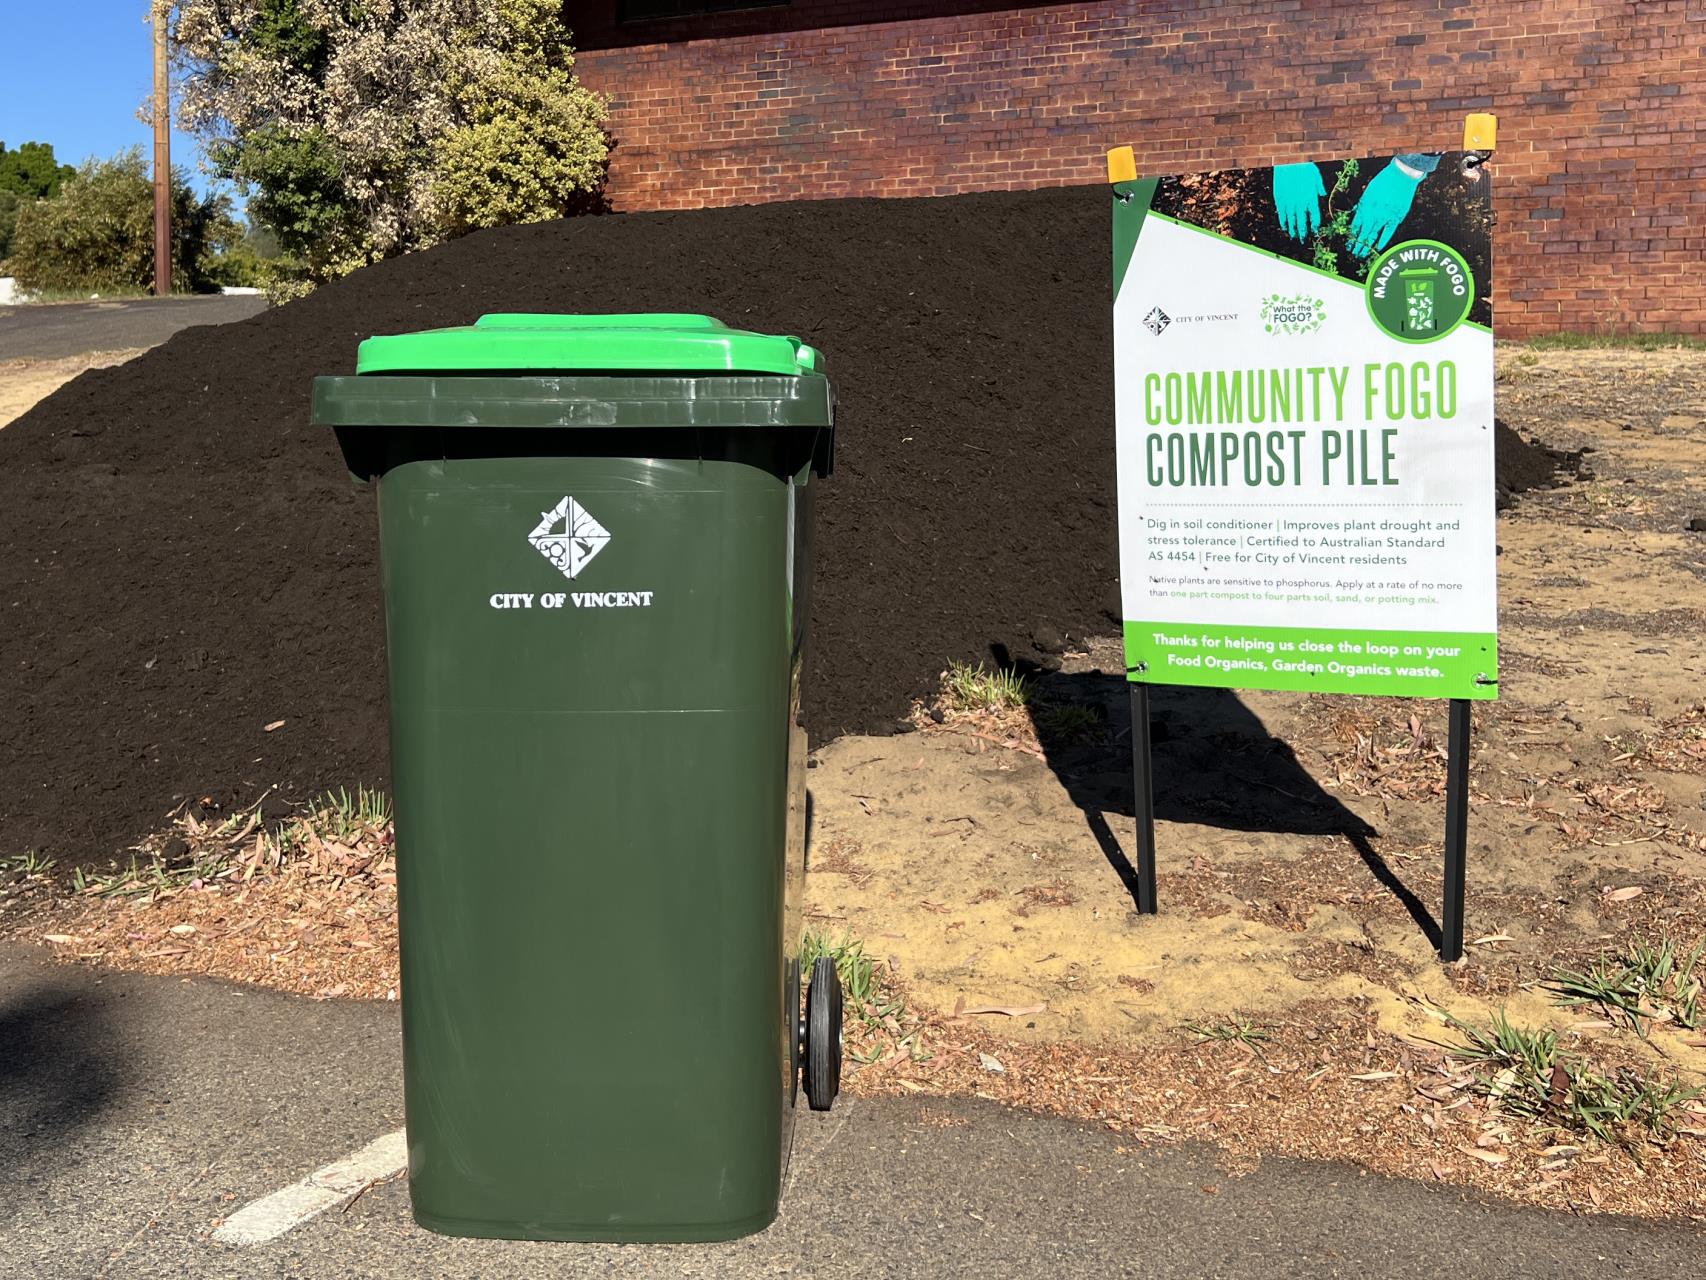 Free compost ahead of the long weekend